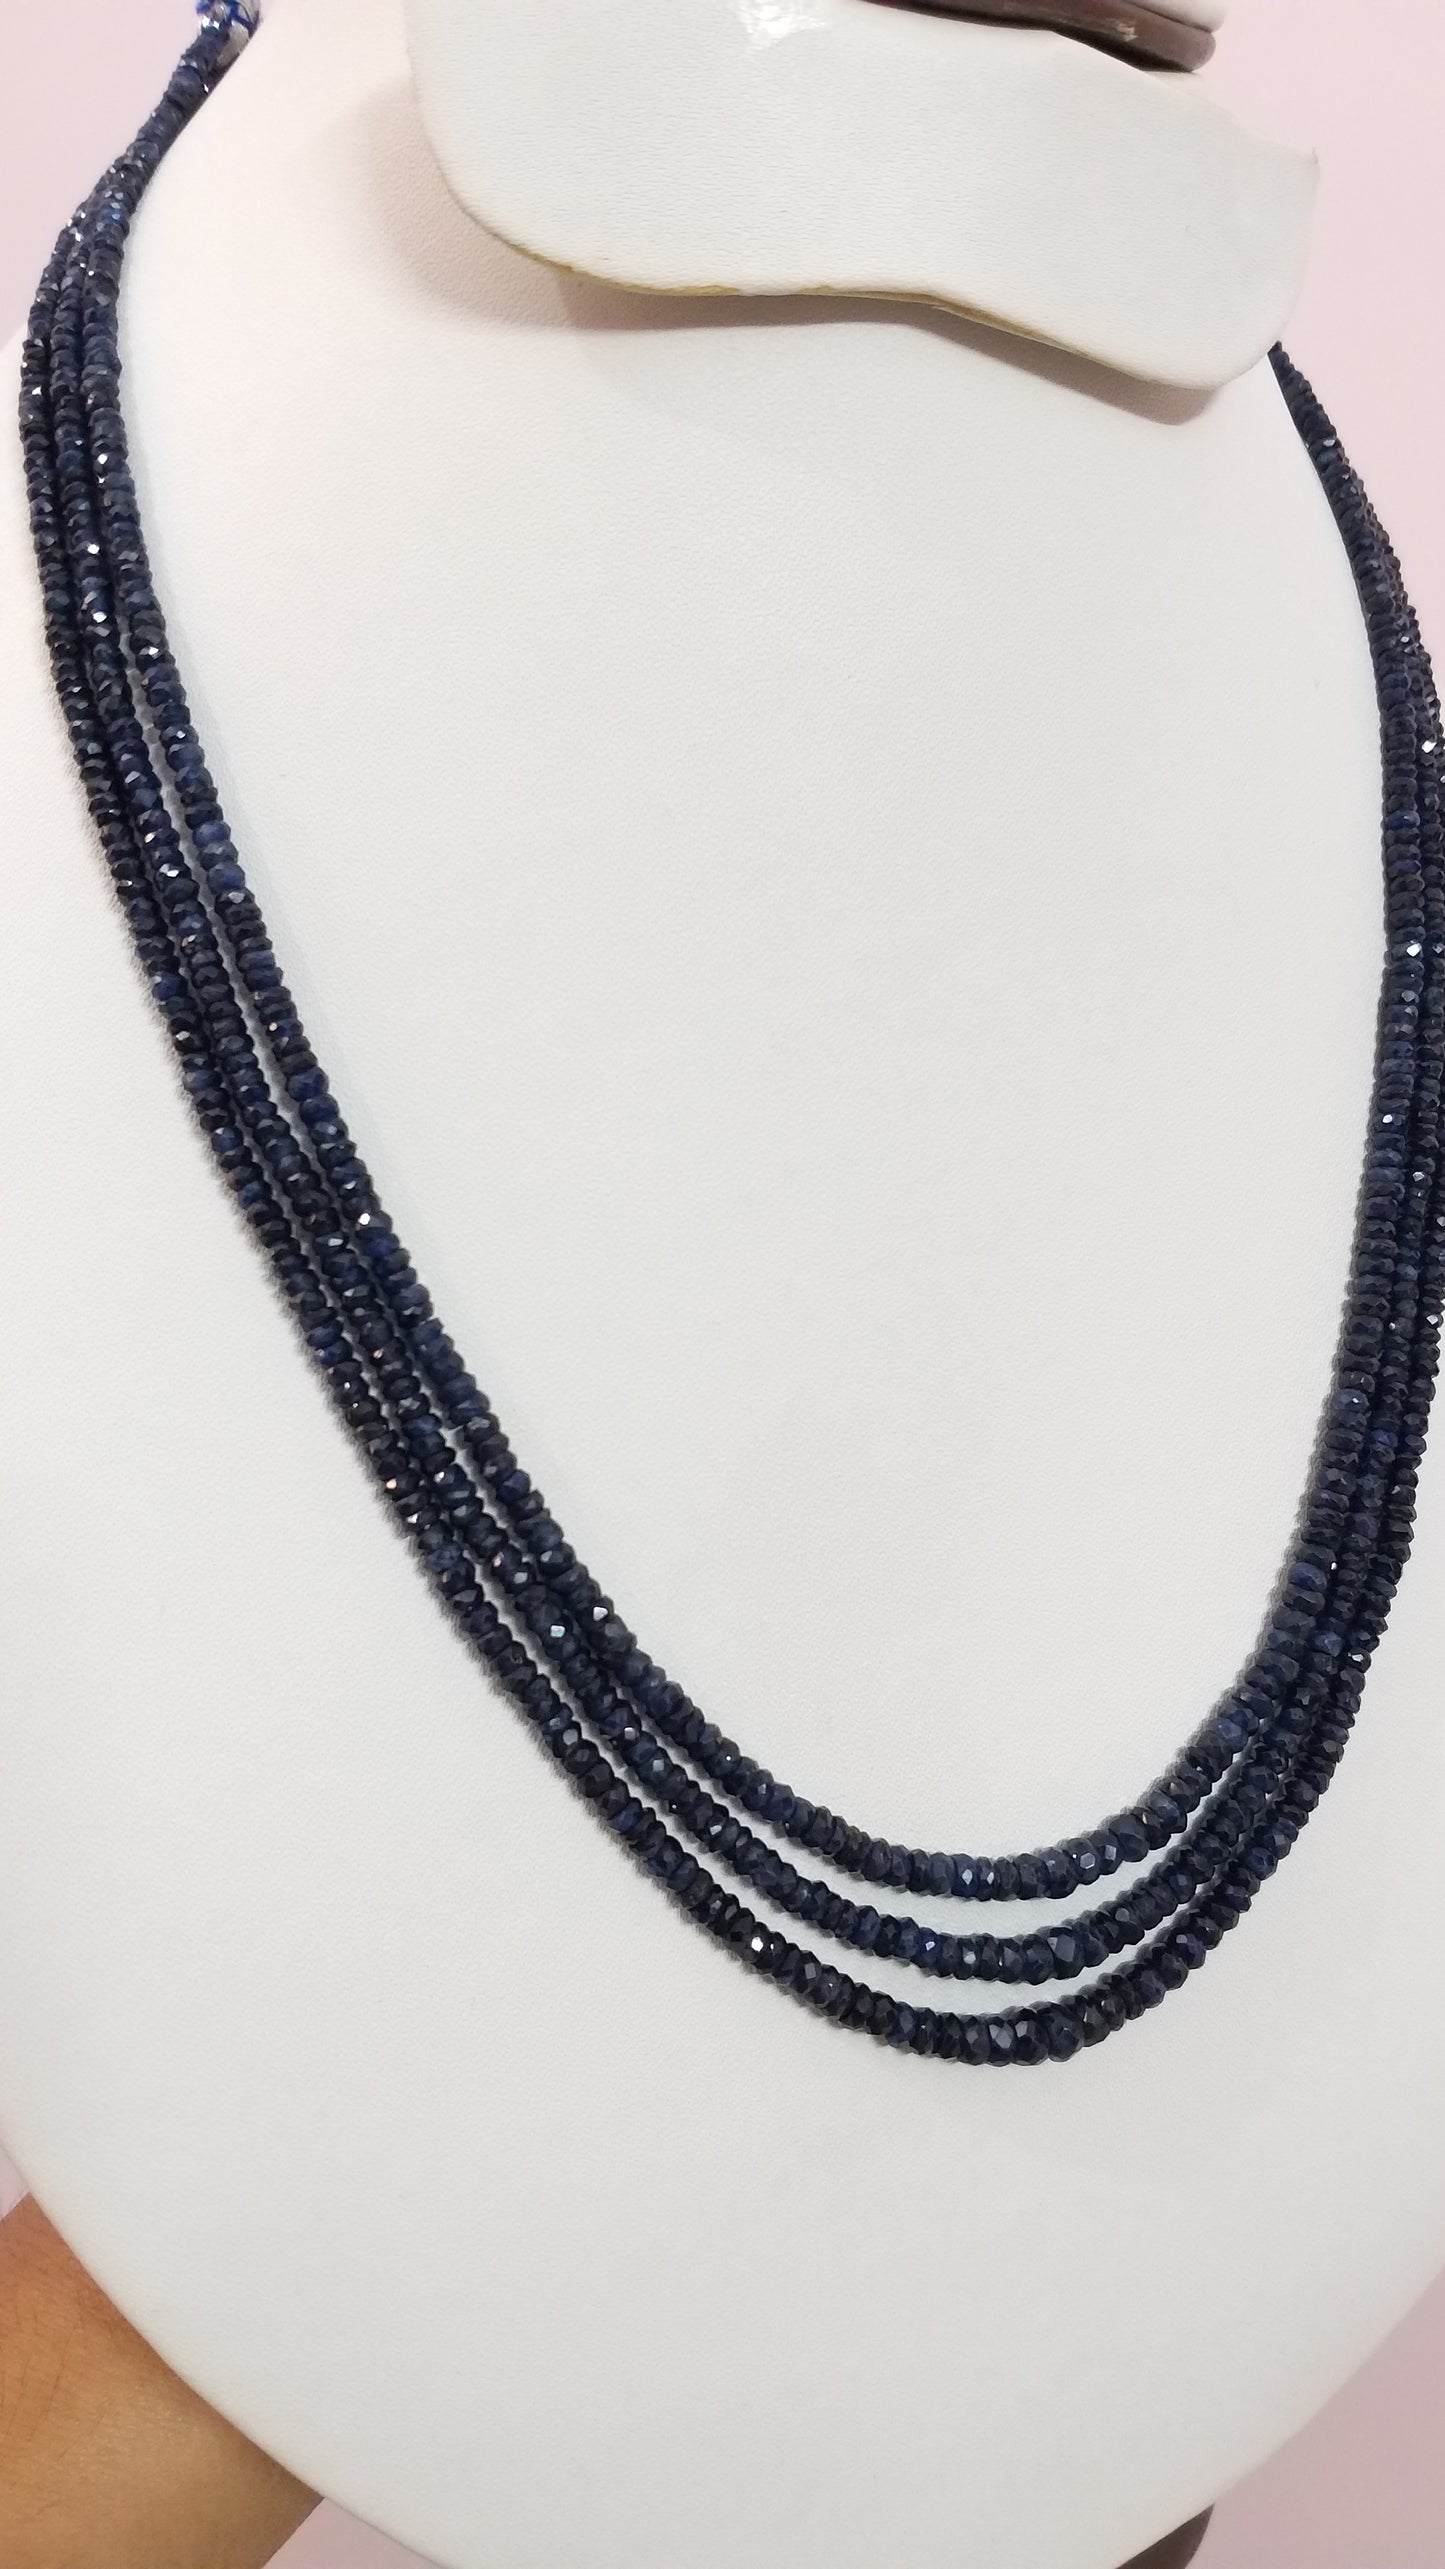 Natural Blue Sapphire Faceted Beads Necklace, Blue Sapphire Necklace